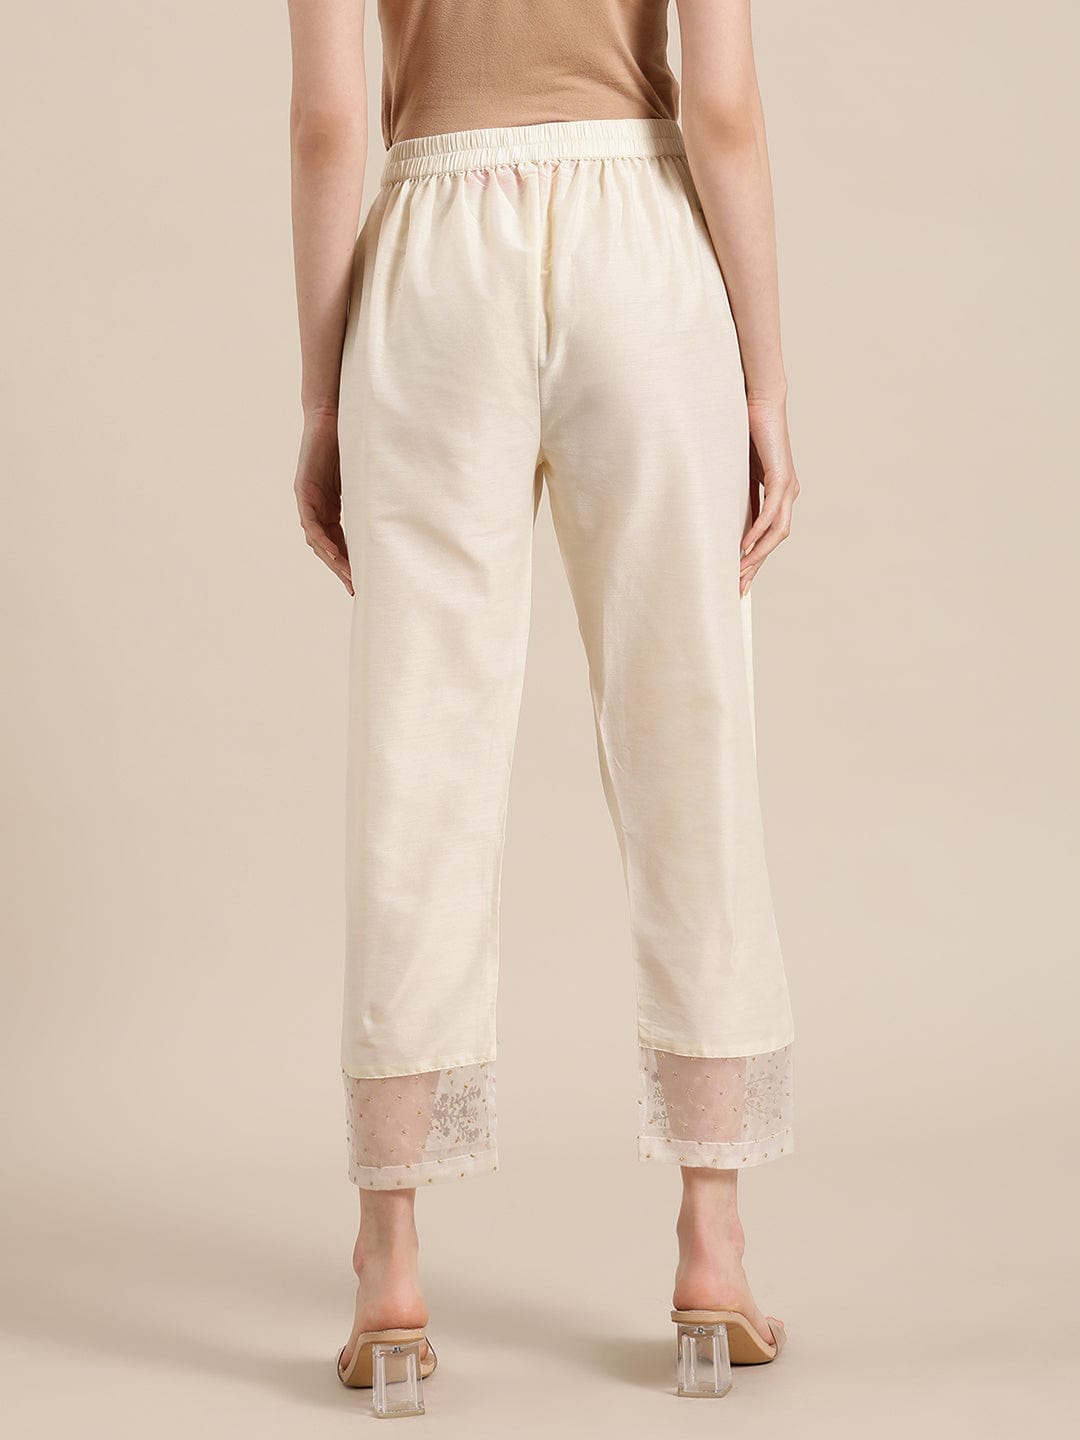 Buy Off White Trousers  Pants for Women by ORCHID BLUES Online  Ajiocom